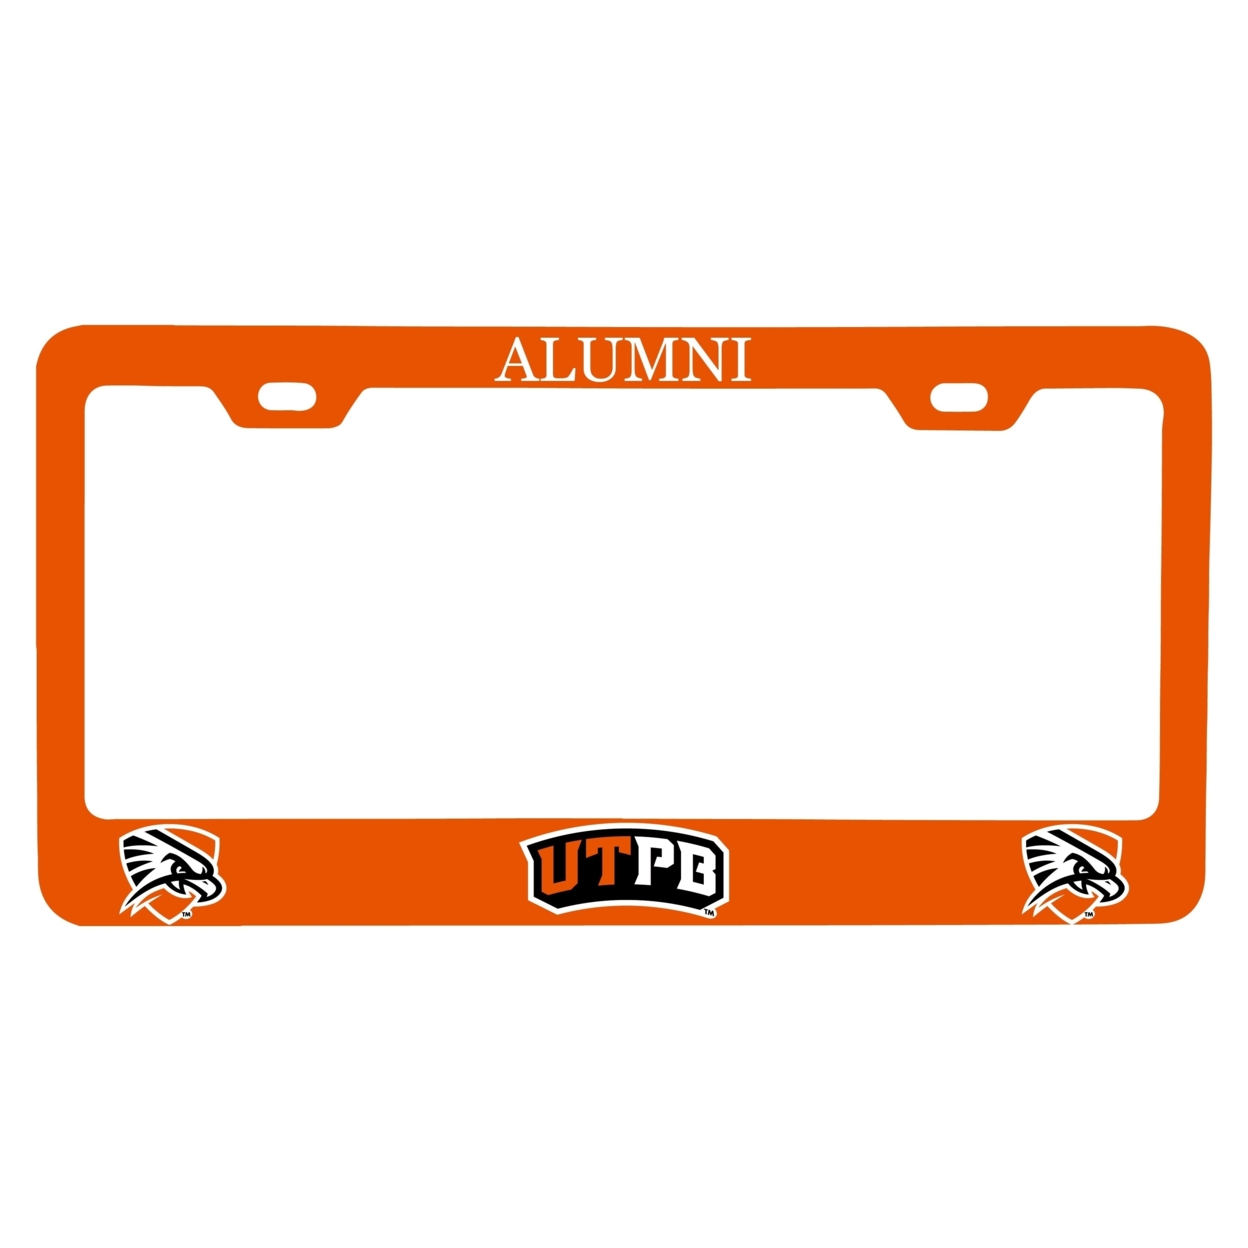 University Of Texas Of The Permian Basin Alumni License Plate Frame